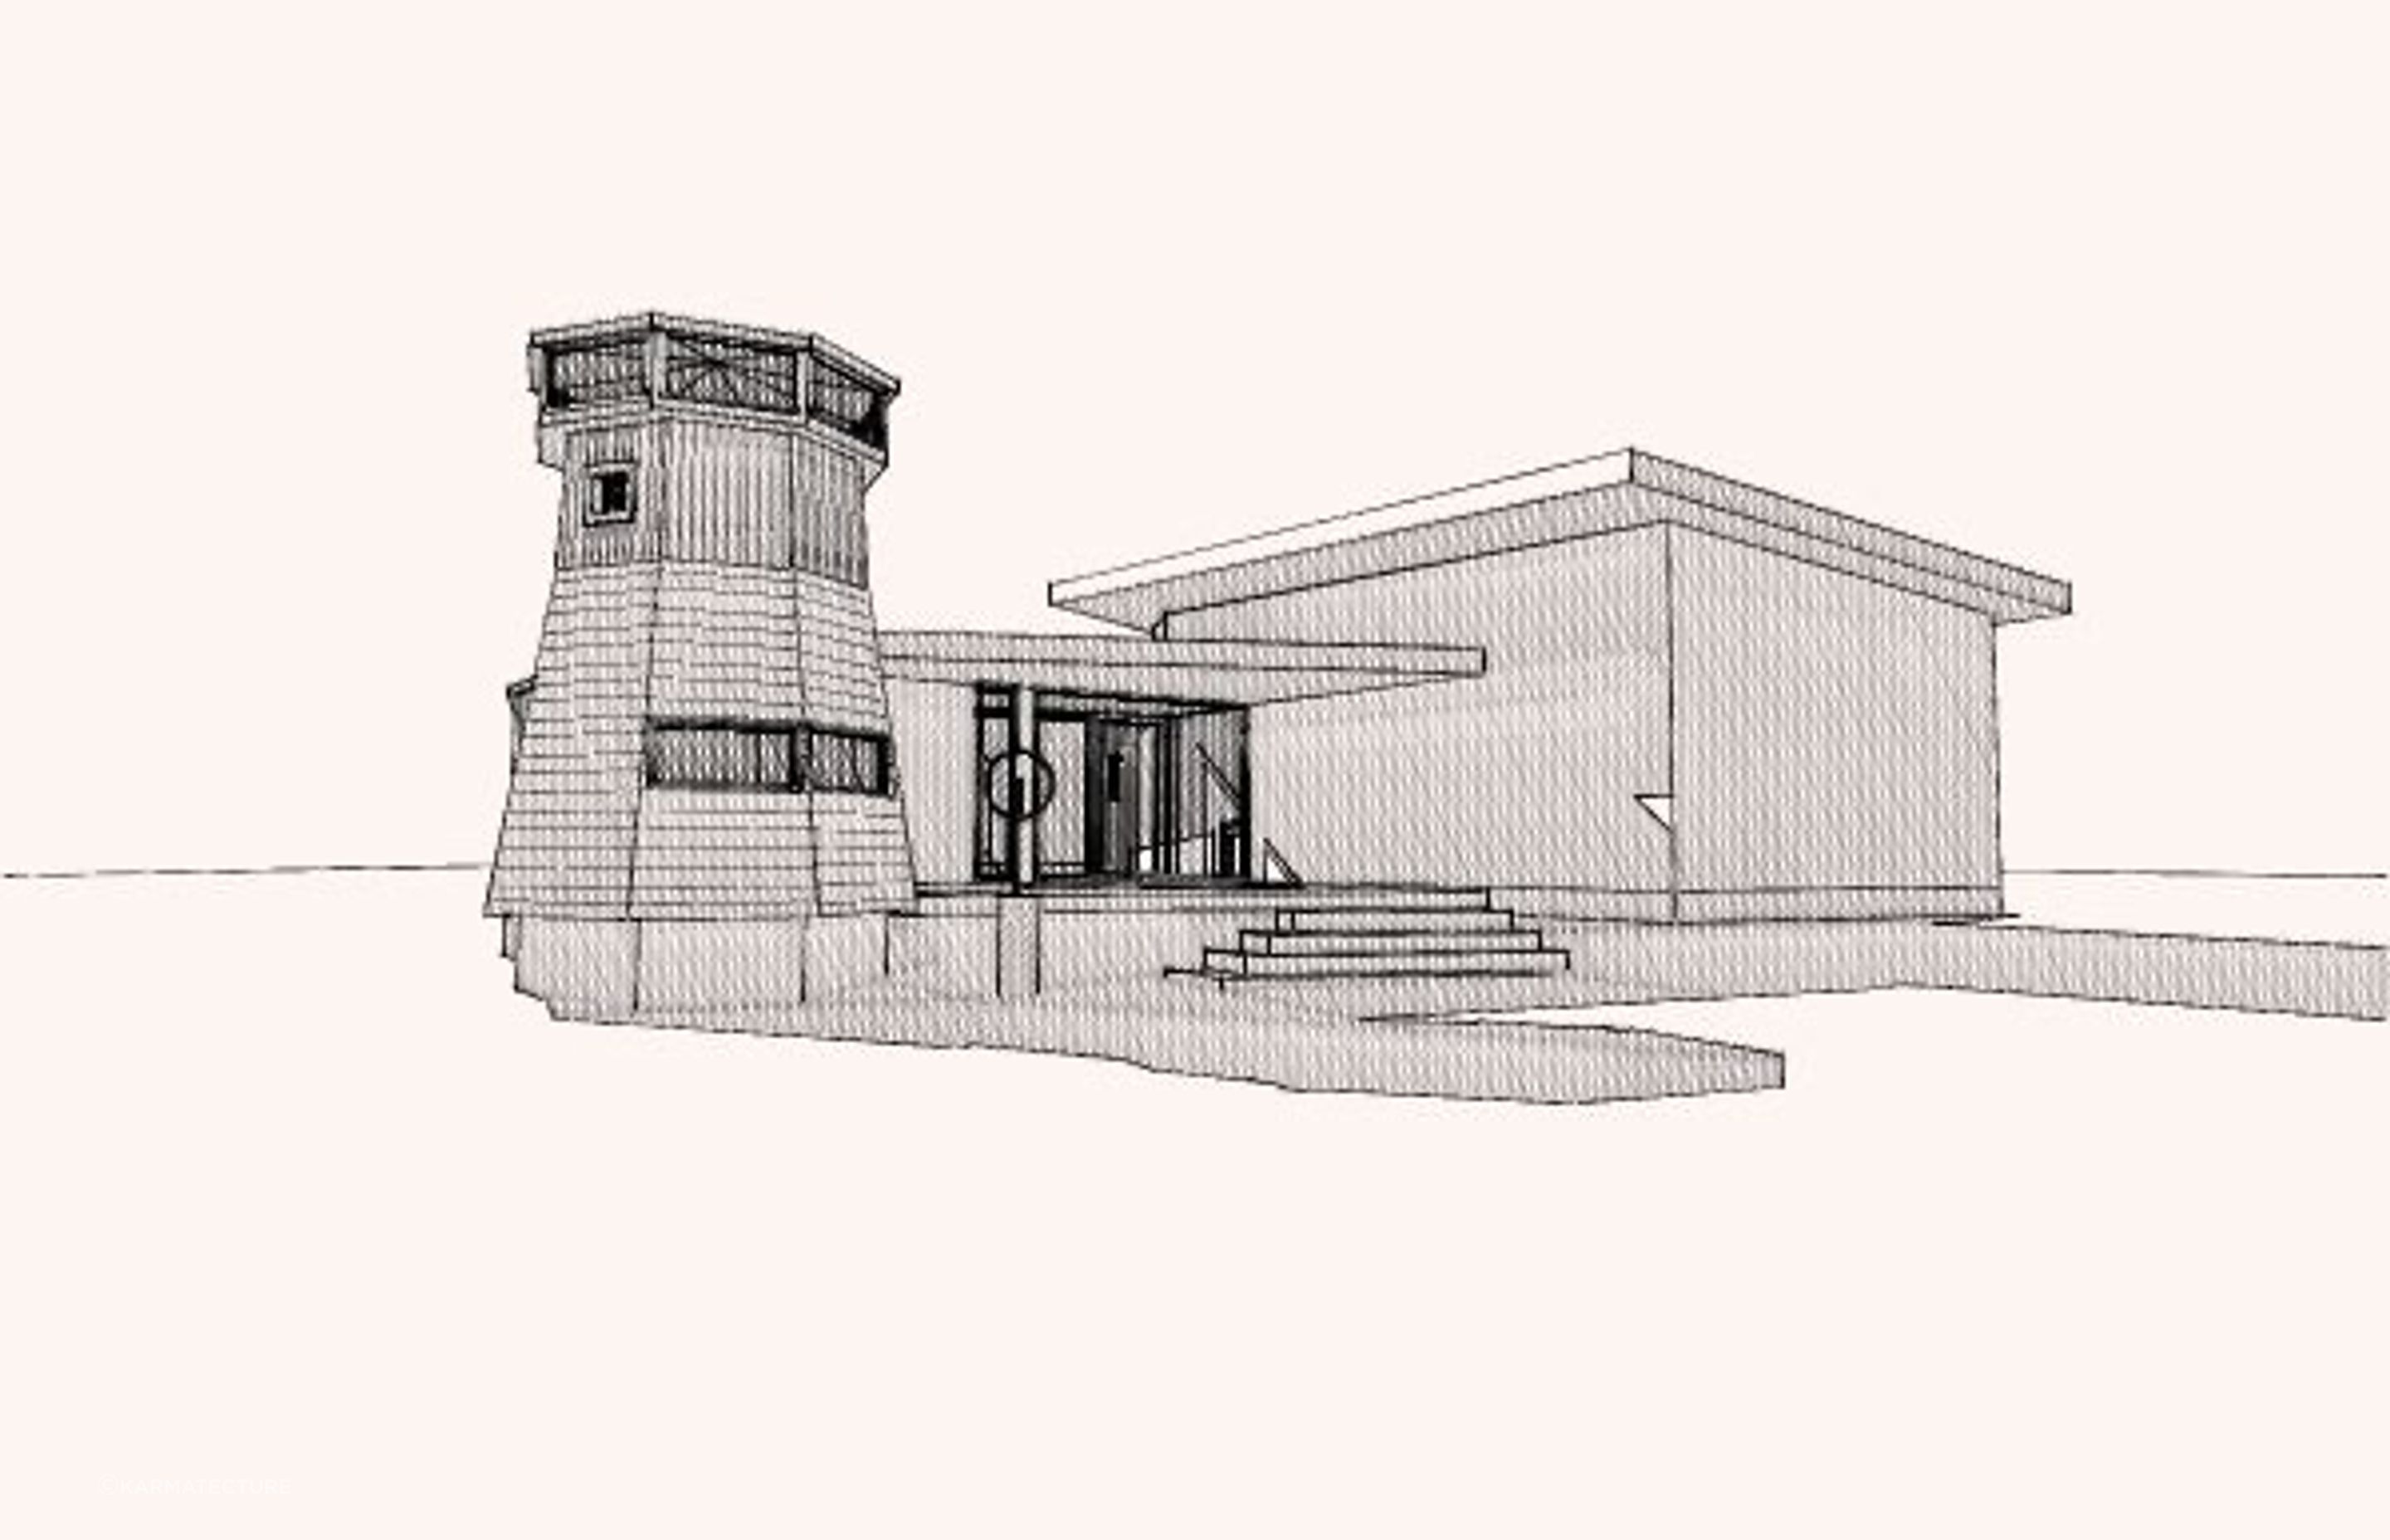 Early sketch elevation showing the arrangement of structures